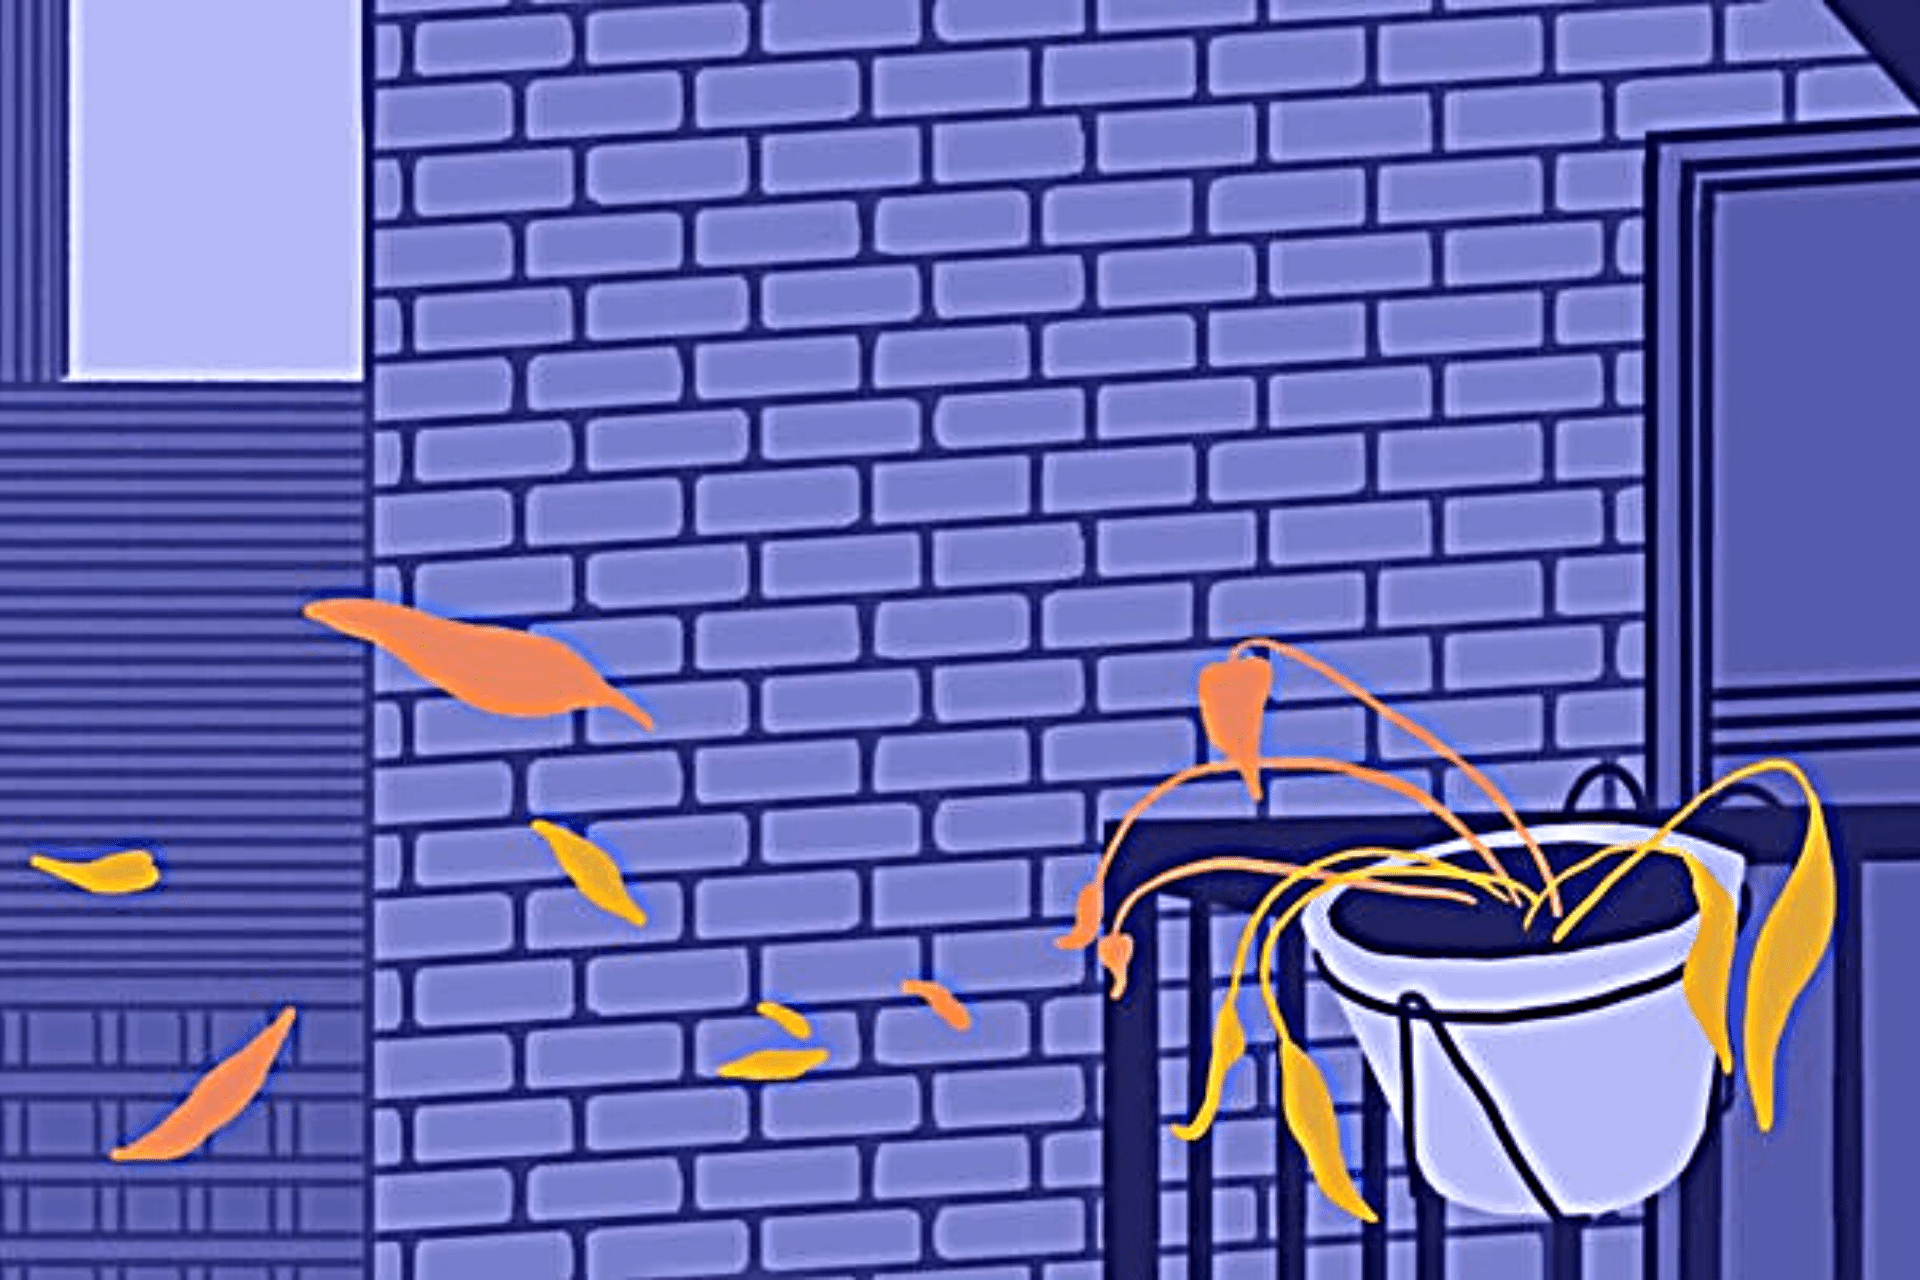 An image of a dying potted plant hanging on the fire escape stairs of an apartment building.